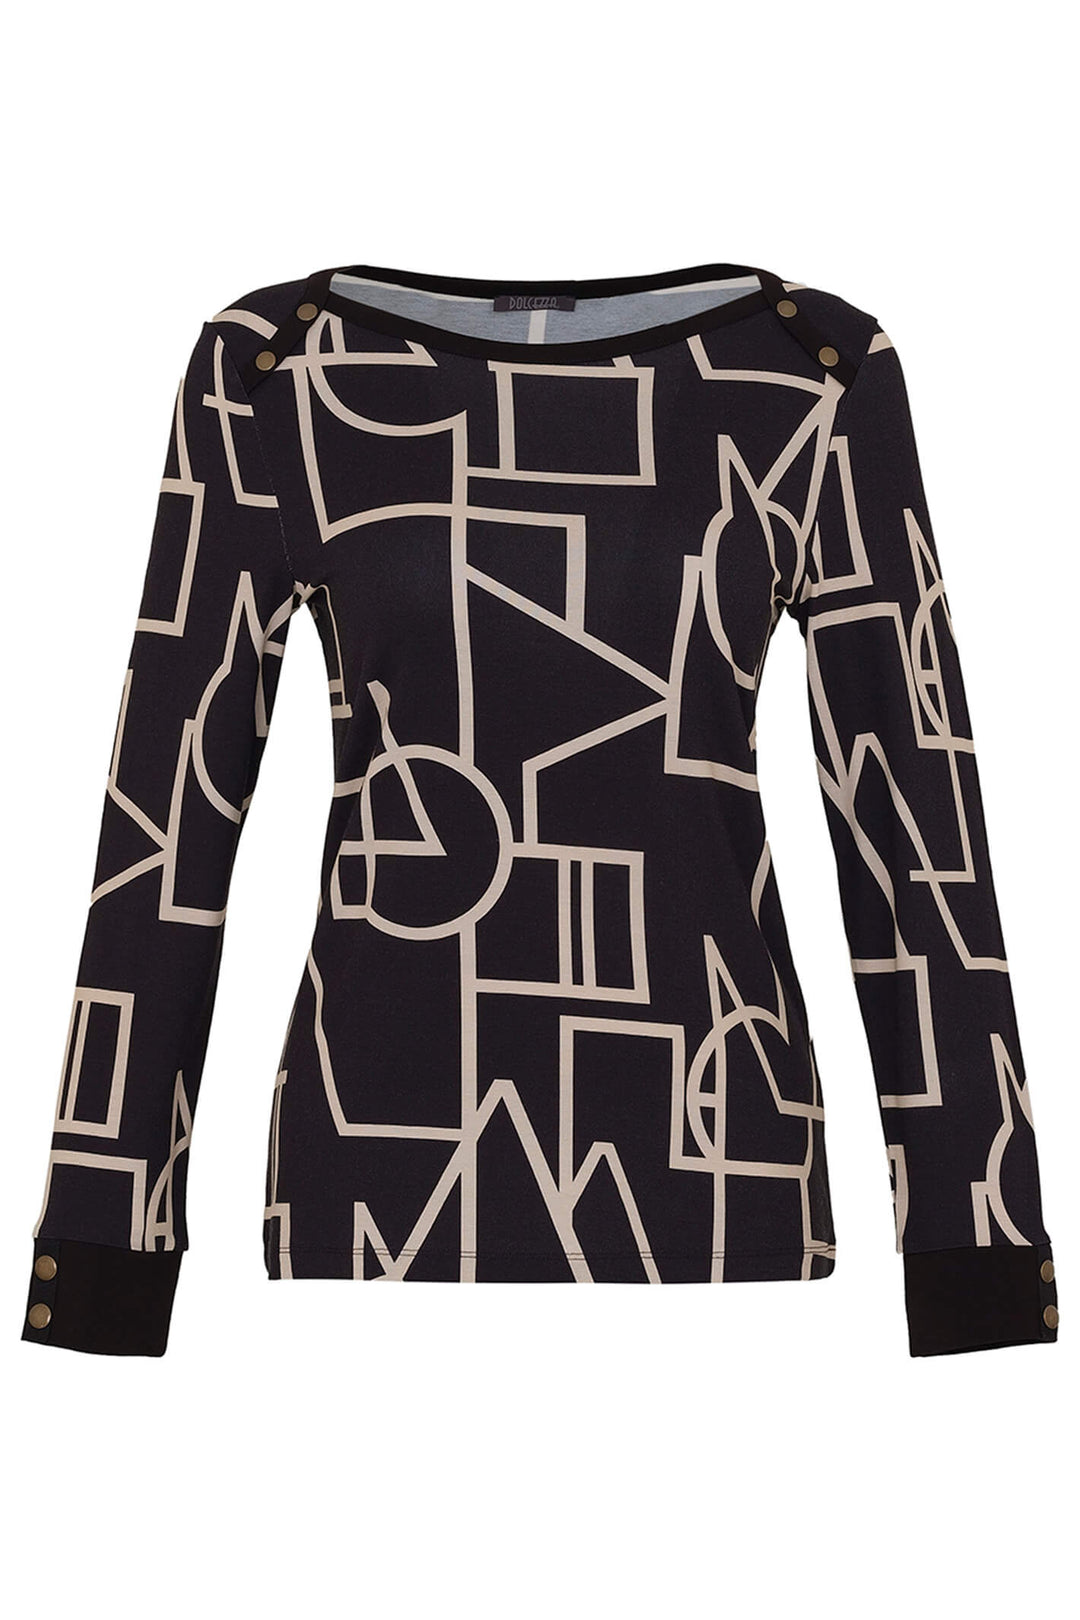 Dolcezza 73101 Black Upbeat Print Long Sleeve Top - Experience Boutique